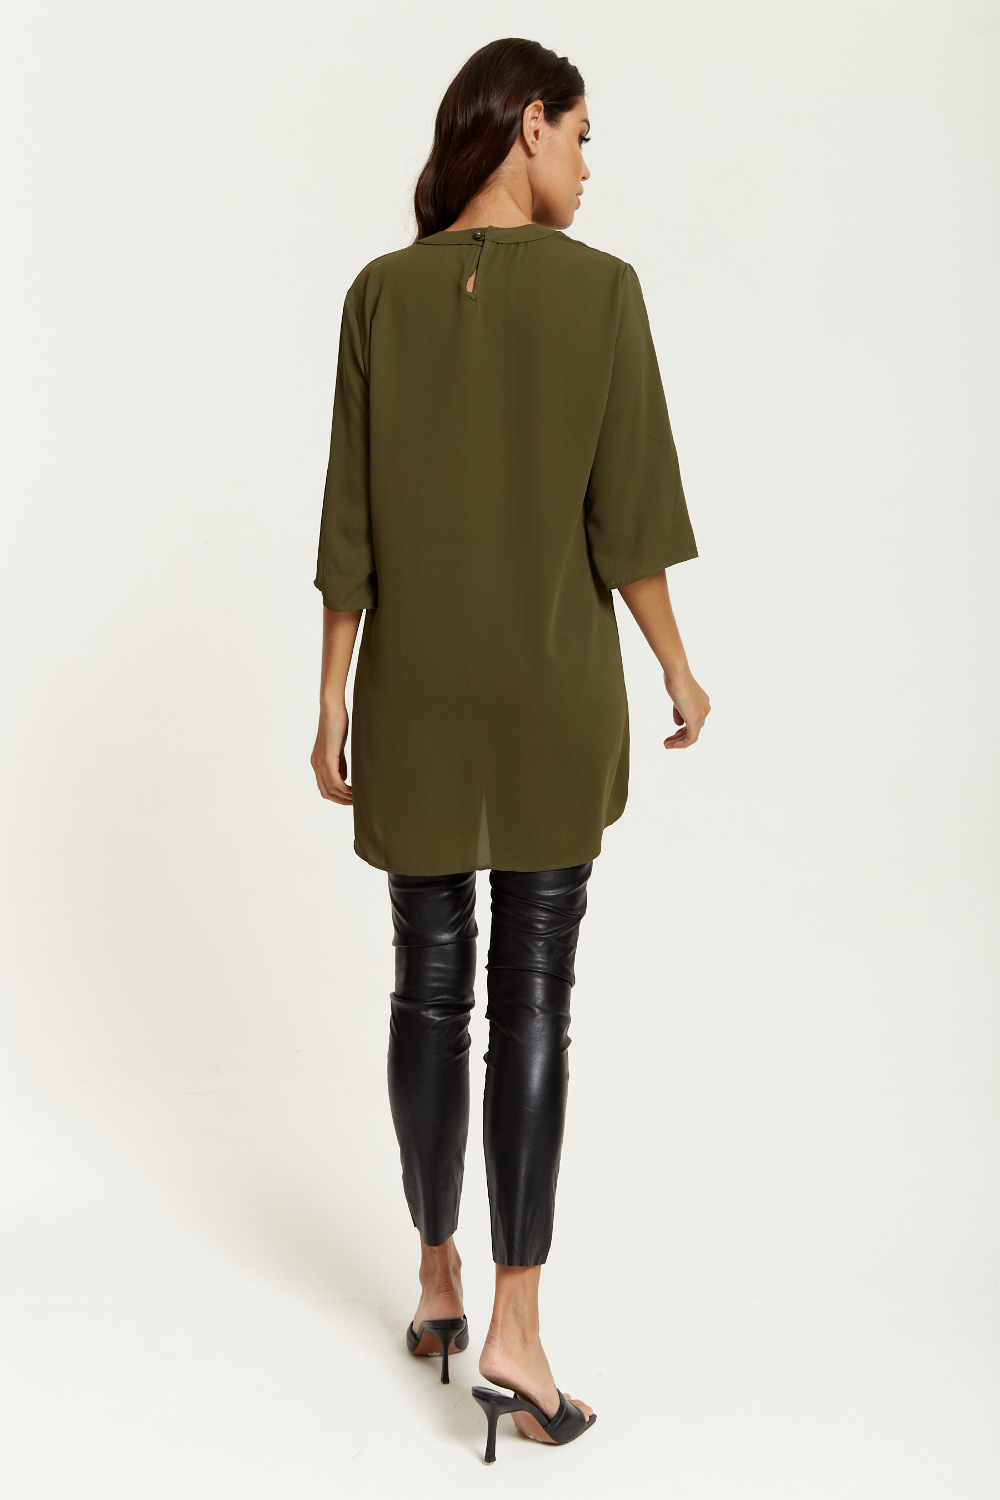 Oversized Detailed Neckline Tunic with 3/4 Sleeves in Khaki GLR FASHION NETWORKING